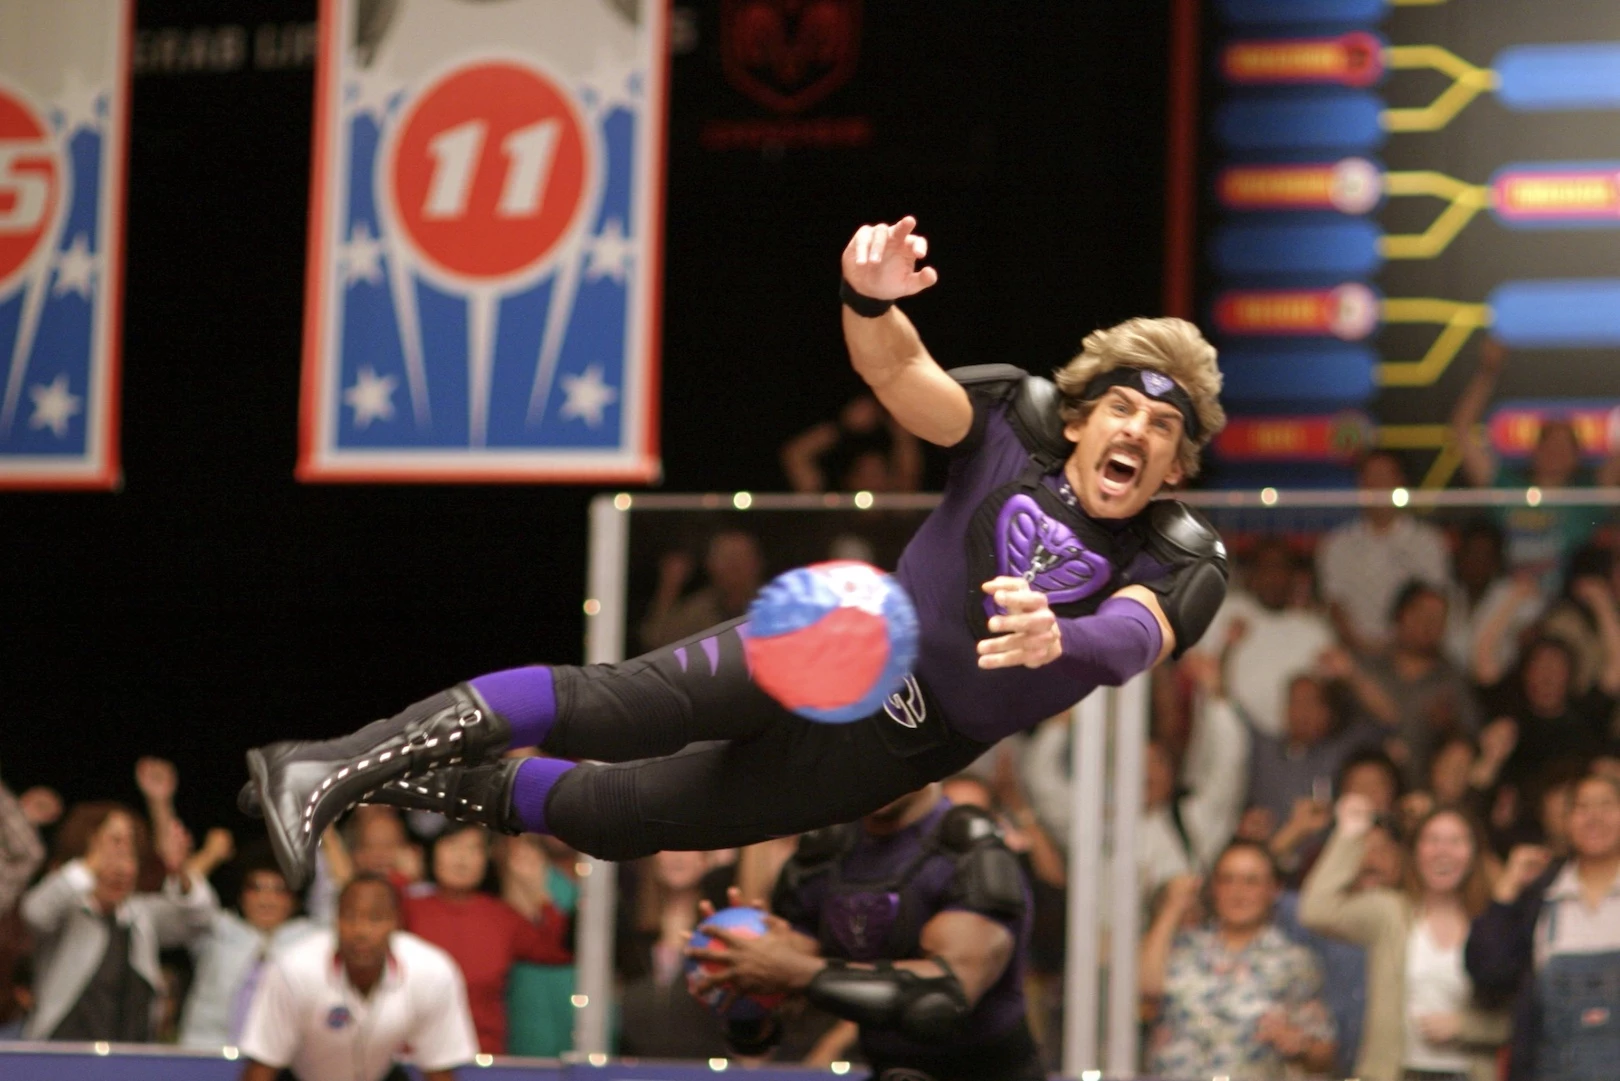 Dodgeball 2': The Cast, Release Date & Everything Else We Know – Hollywood  Life